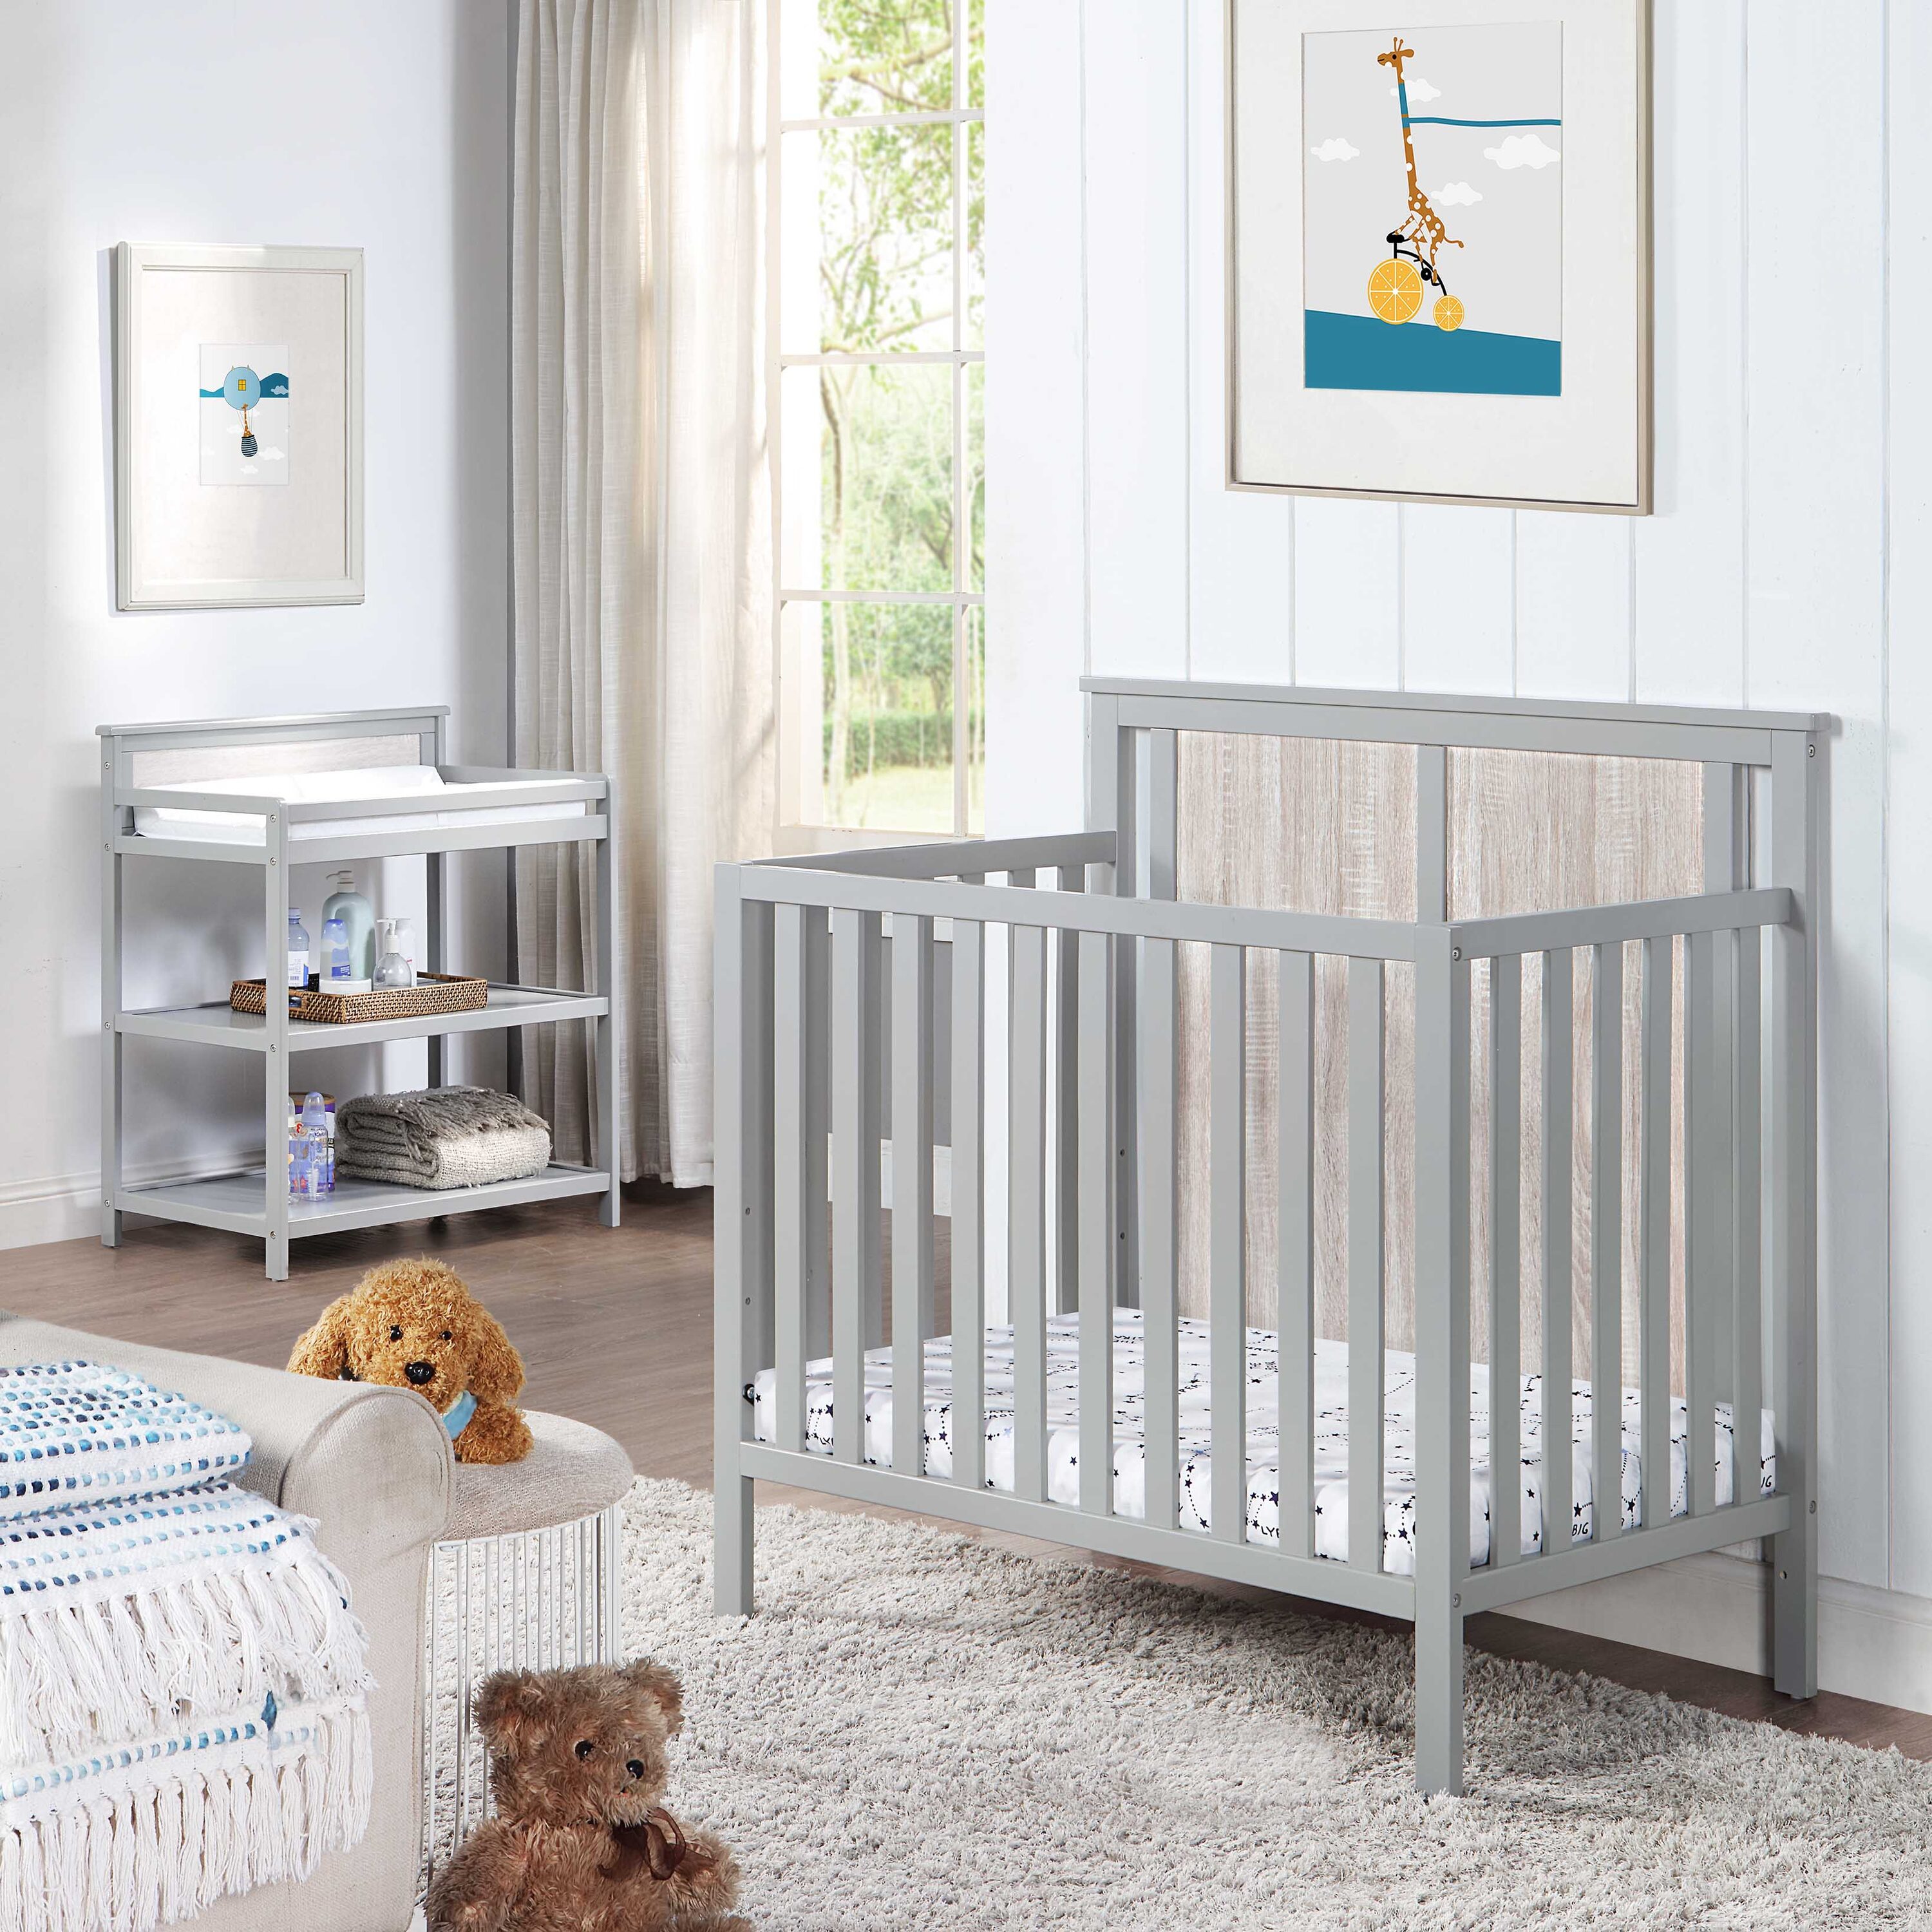 Suite Bebe Connelly 3-in-1 Mini Island Crib - Gray | Adjustable Mattress Height | CPSC & JPMA Certified | Wood Construction | Painted Finish -  27599-GRY